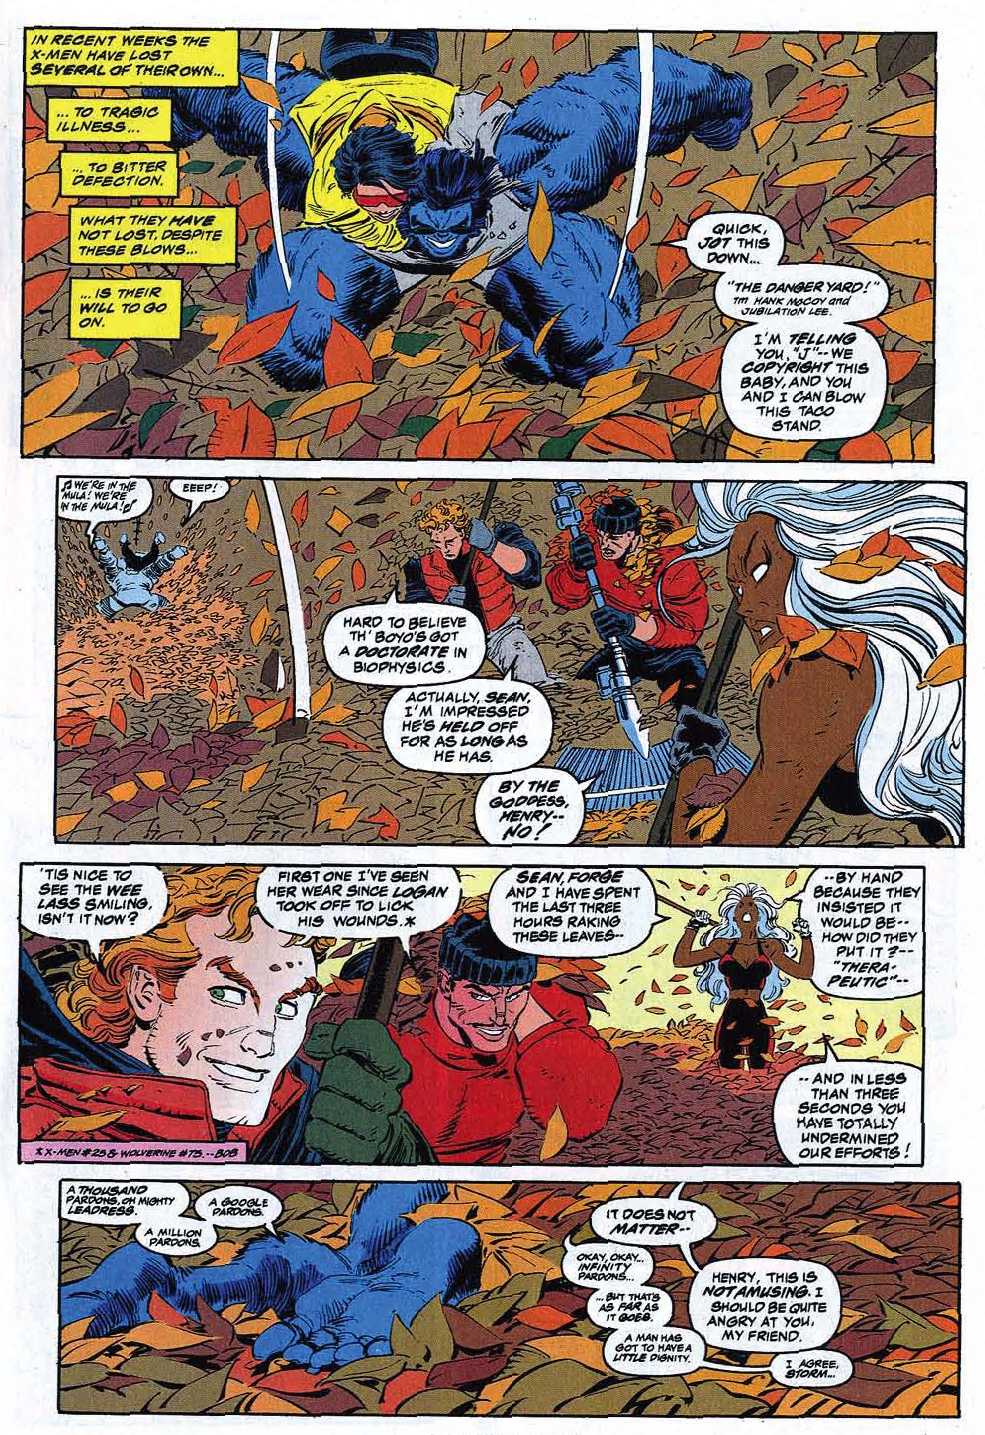 X-Men: The Animated Series' Maya Angelou take on Storm occasionally spilled over into the comics.